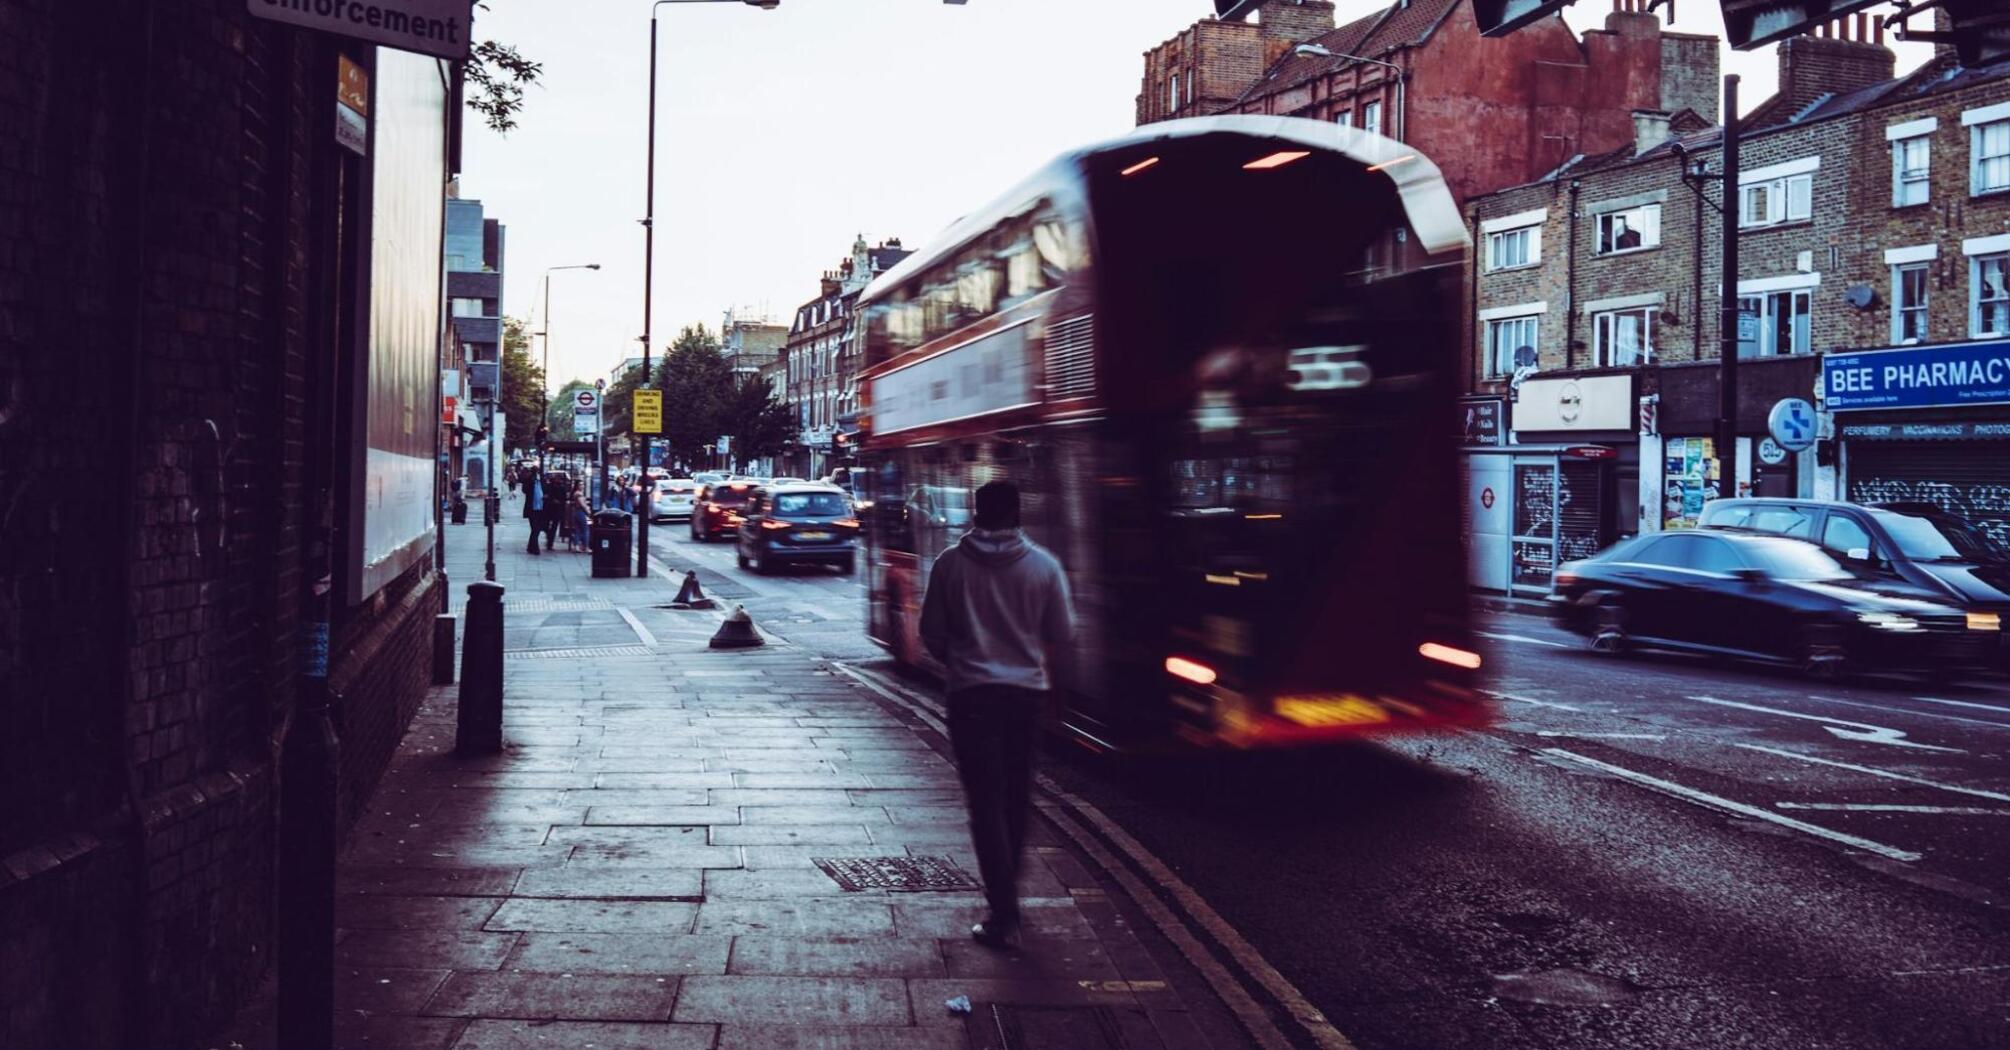 Blurred image of a red double-decker bus moving along a street with a pedestrian walking on the sidewalk